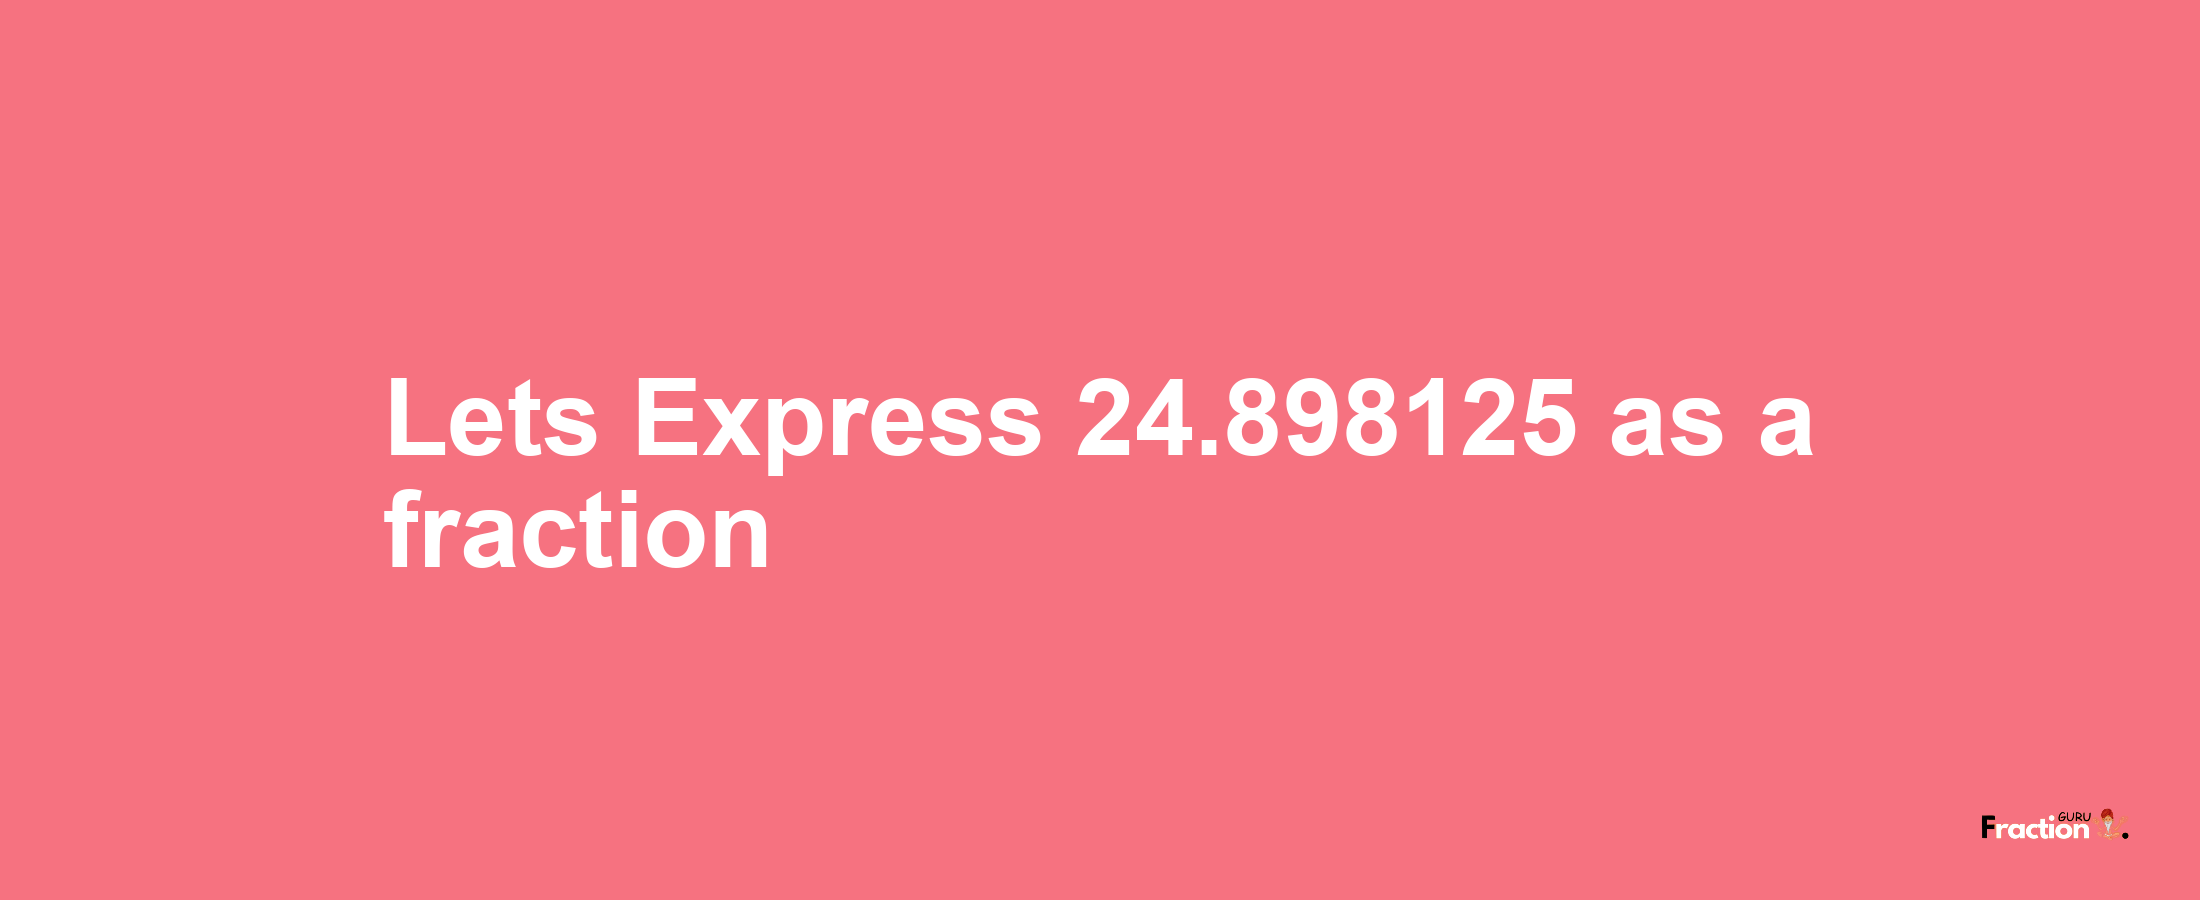 Lets Express 24.898125 as afraction